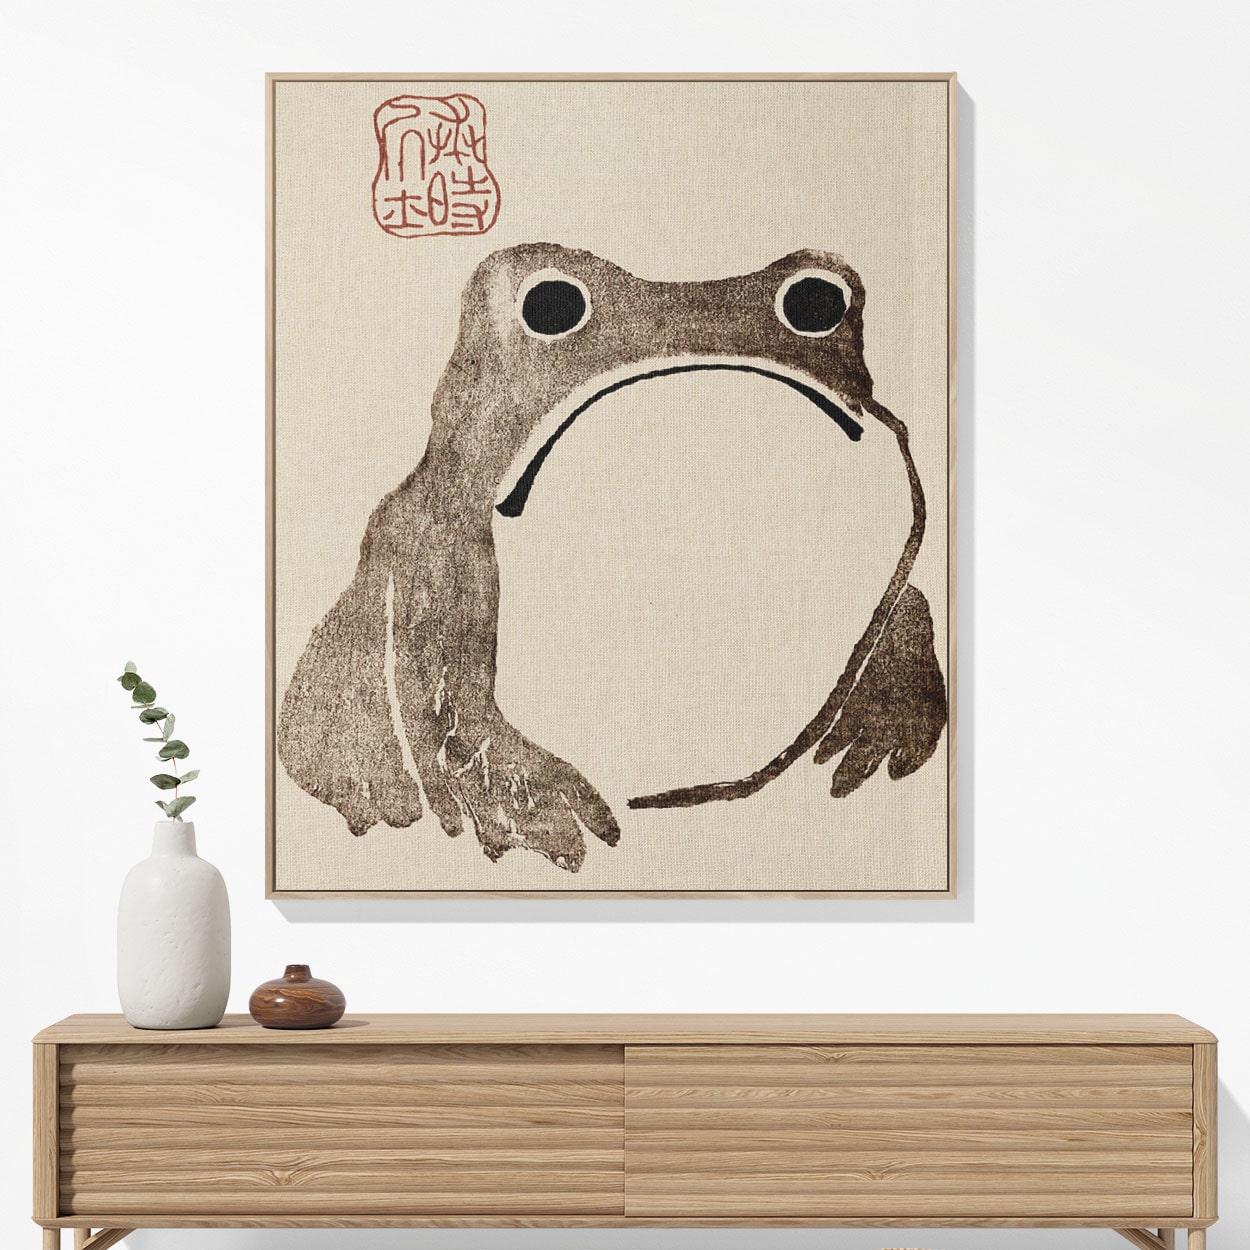 Grumpy Frog Woven Blanket Hanging on a Wall as Framed Wall Art